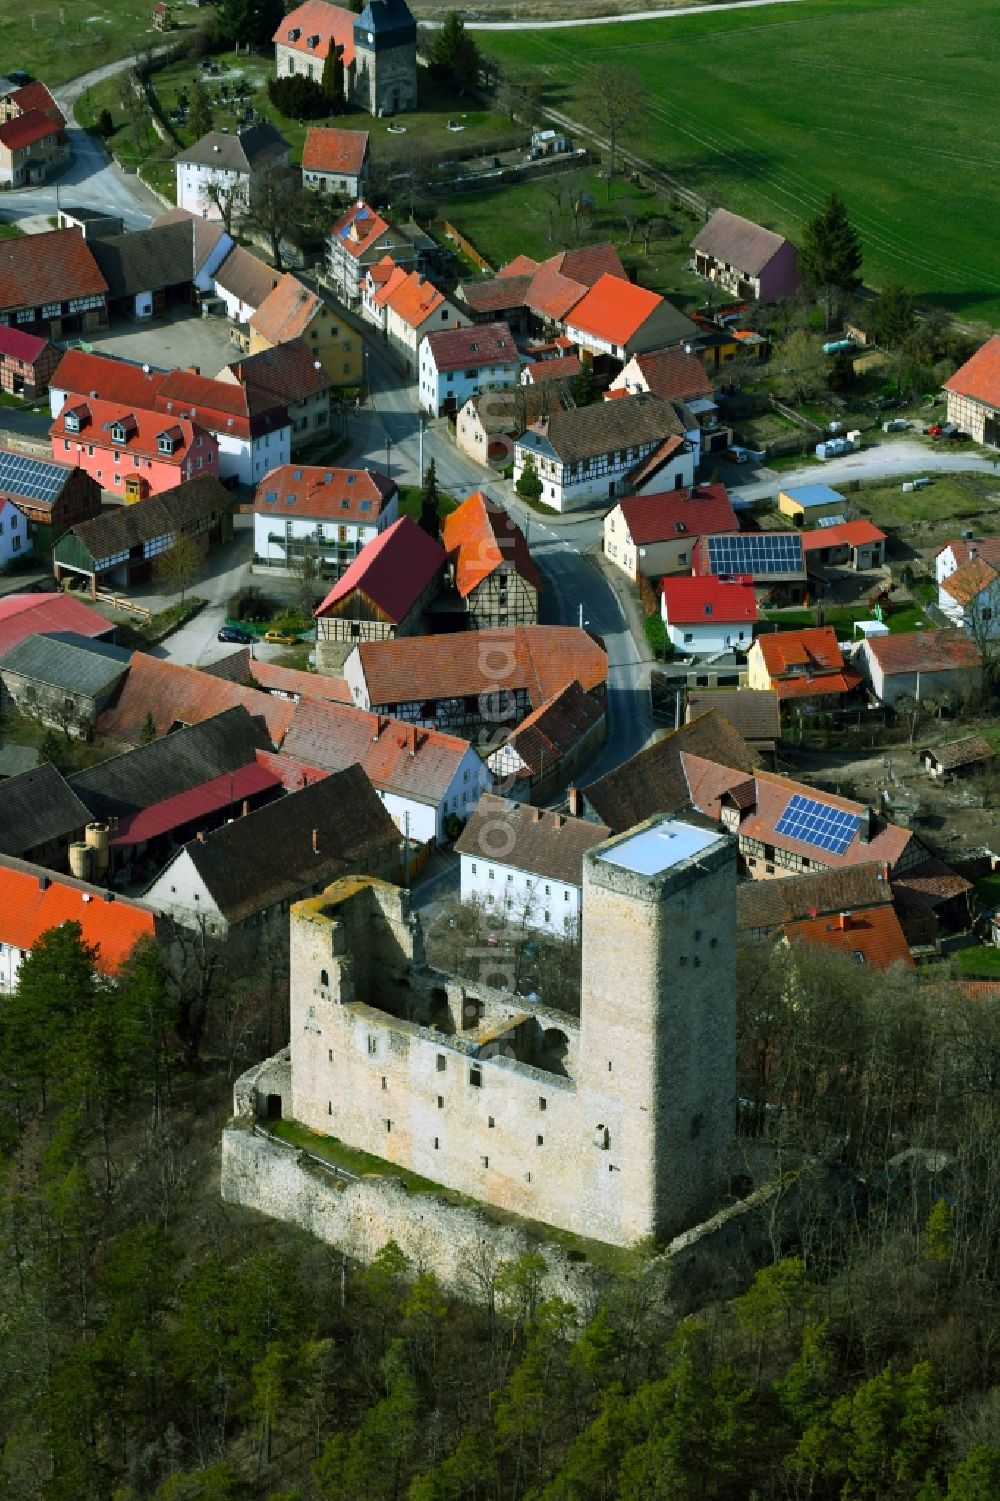 Ehrenstein from the bird's eye view: Ruins and vestiges of the former castle and fortress Ehrenstein in Ehrenstein in the state Thuringia, Germany